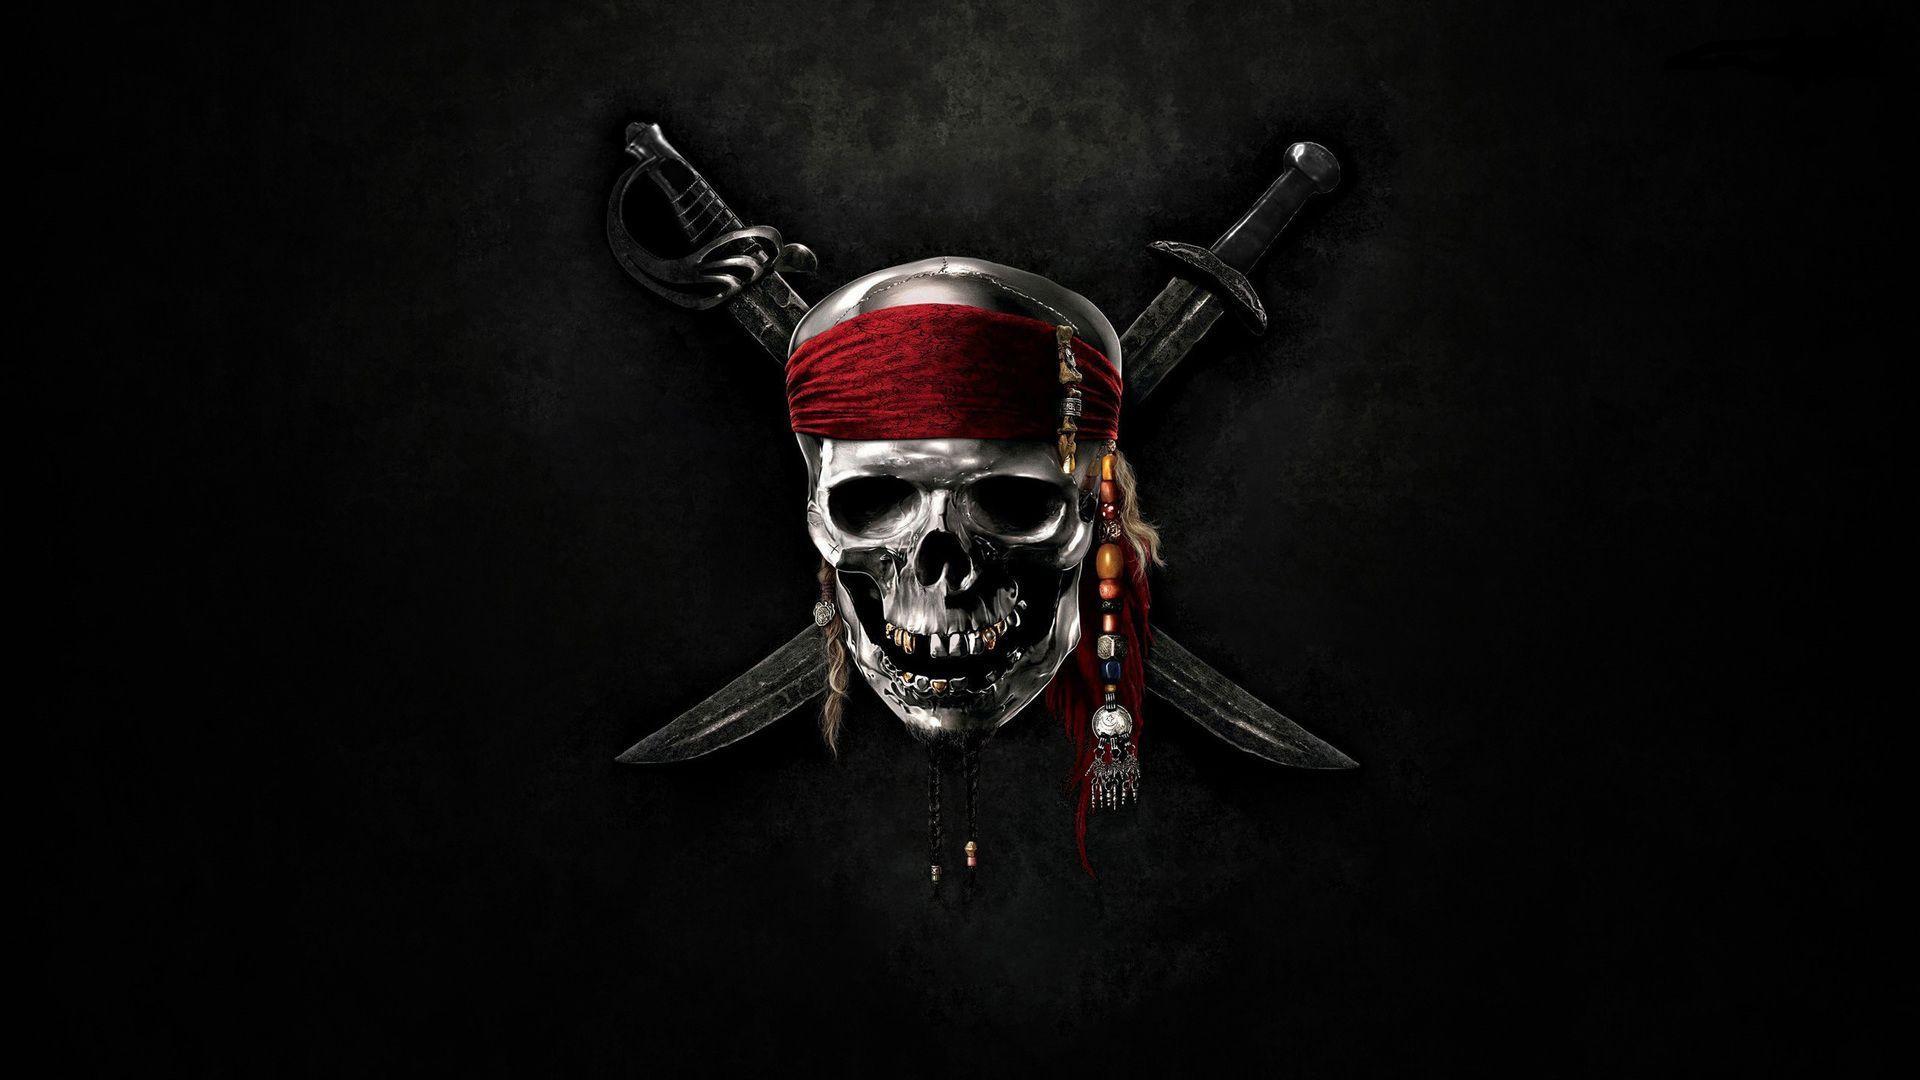 Pirate Flag Pictures  Download Free Images on Unsplash